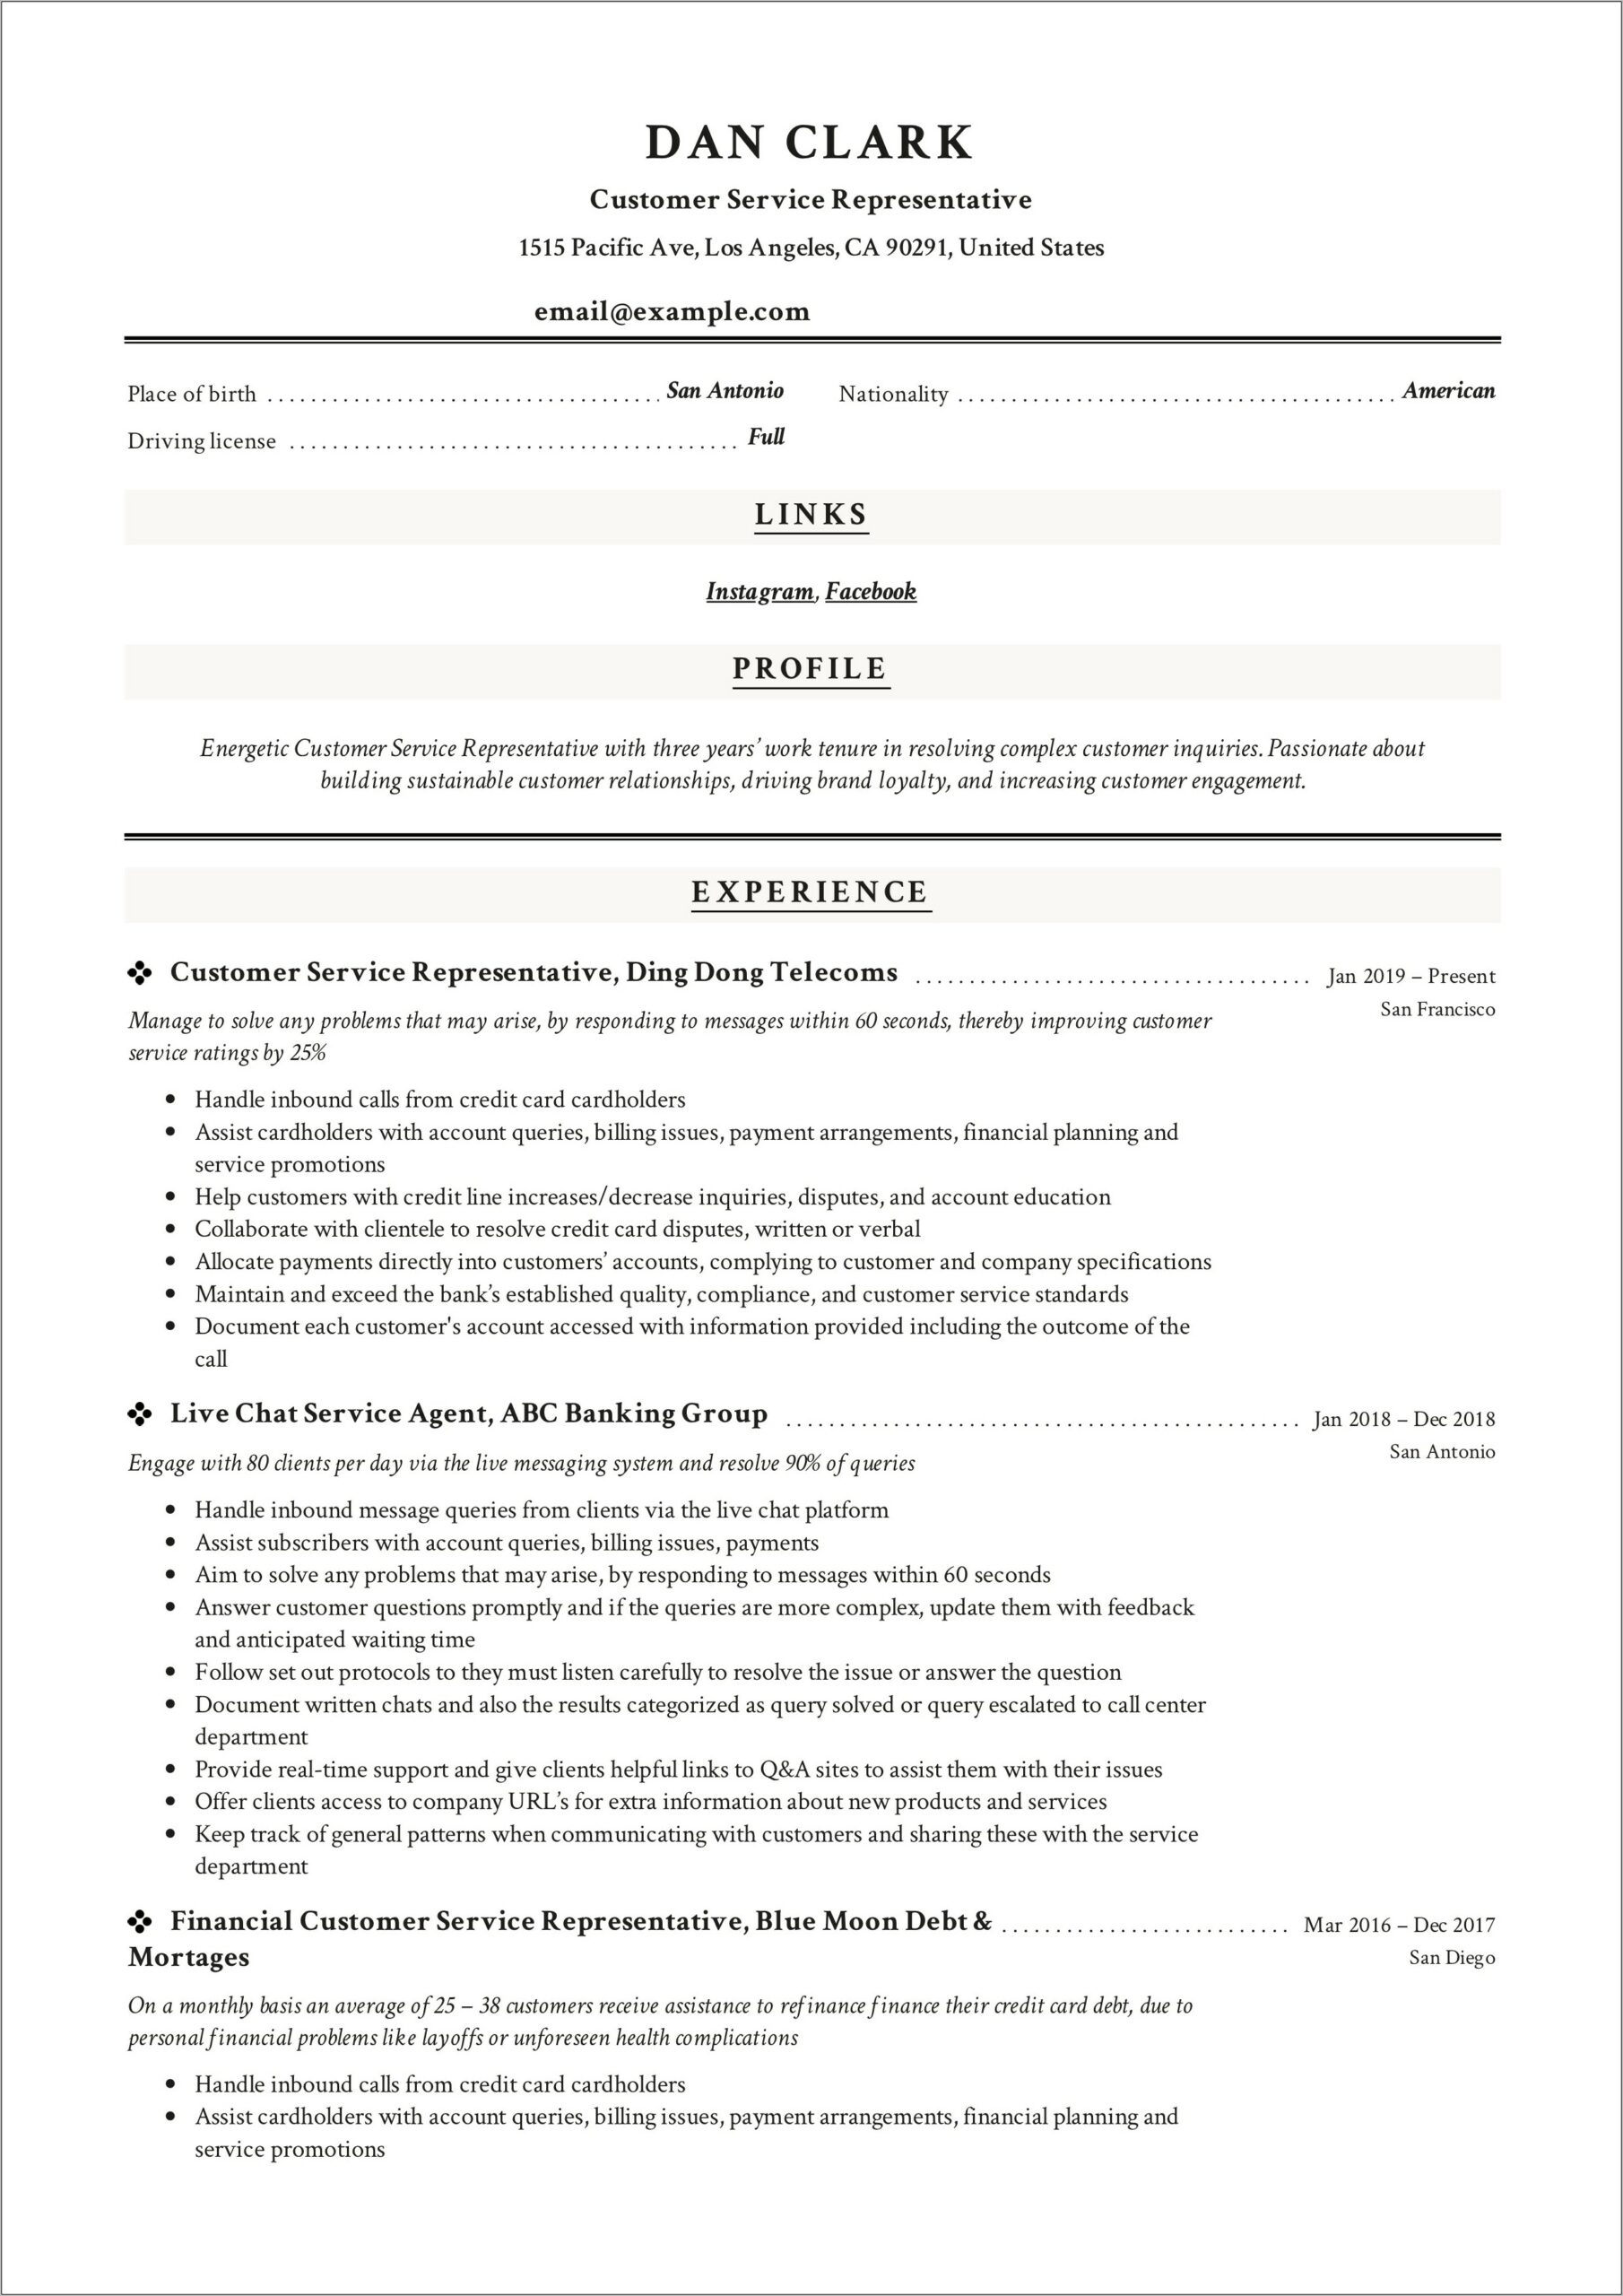 Sample Resume With Customer Engagement